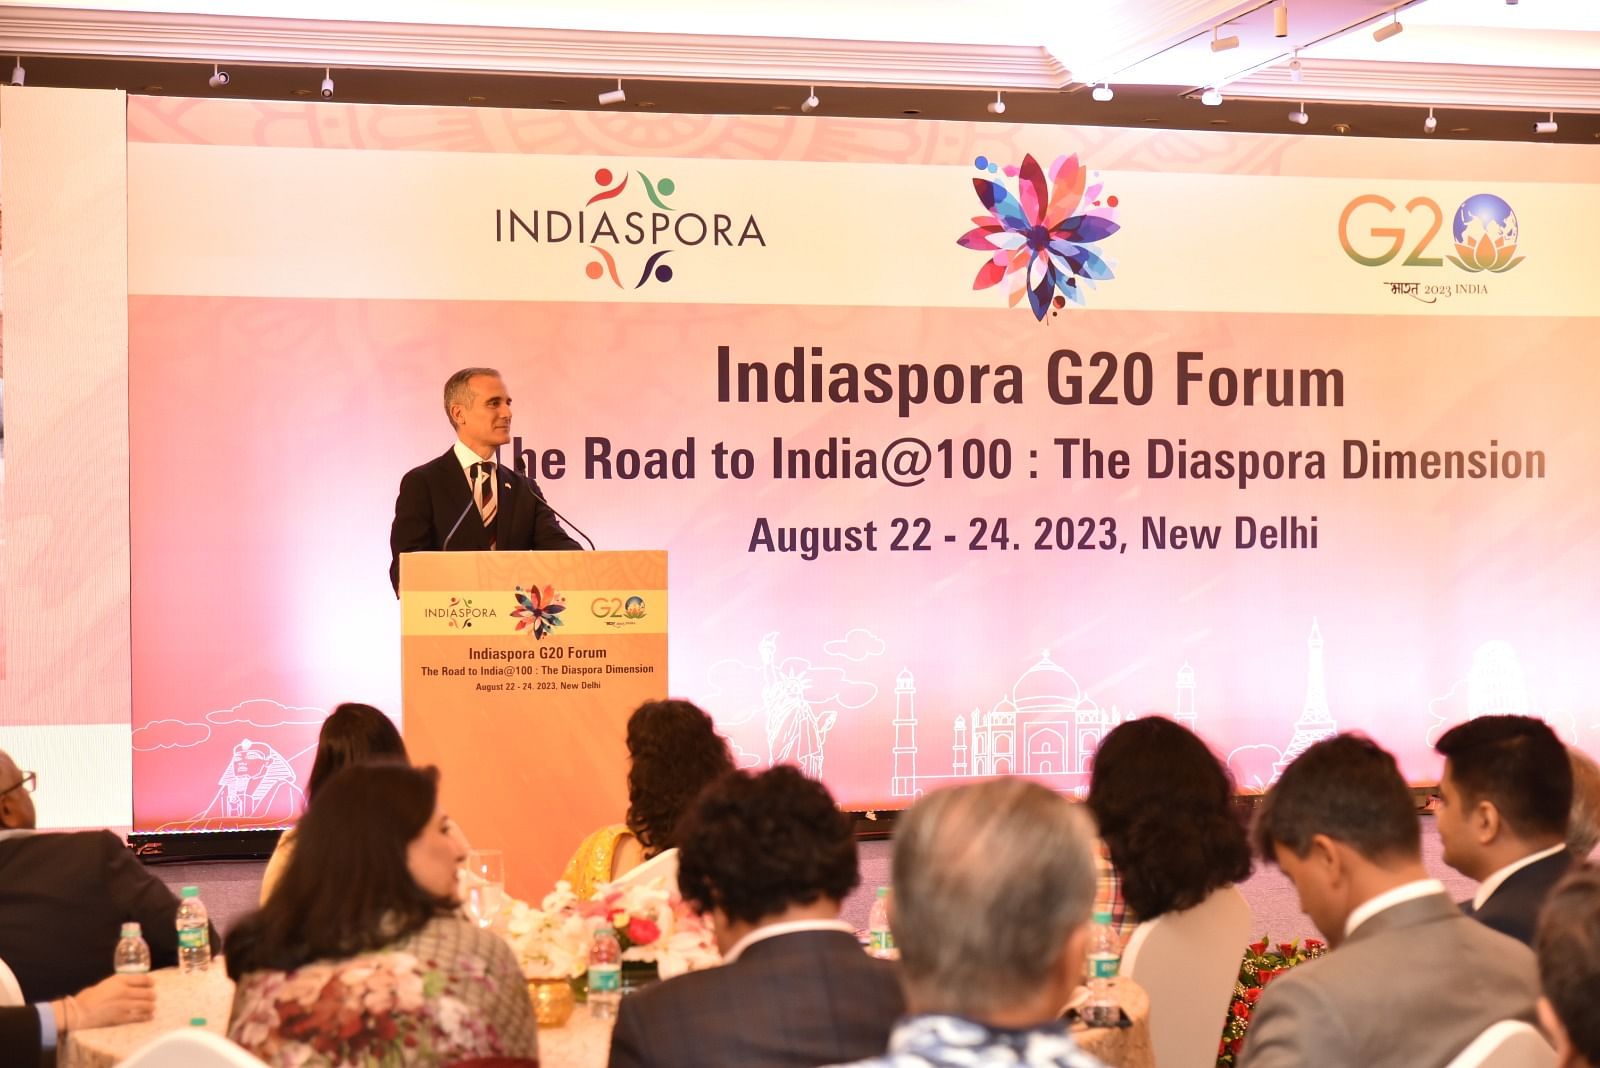 Indian diaspora event in Delhi looks to set tone for G20 summit, aims to  become 'Davos of India'